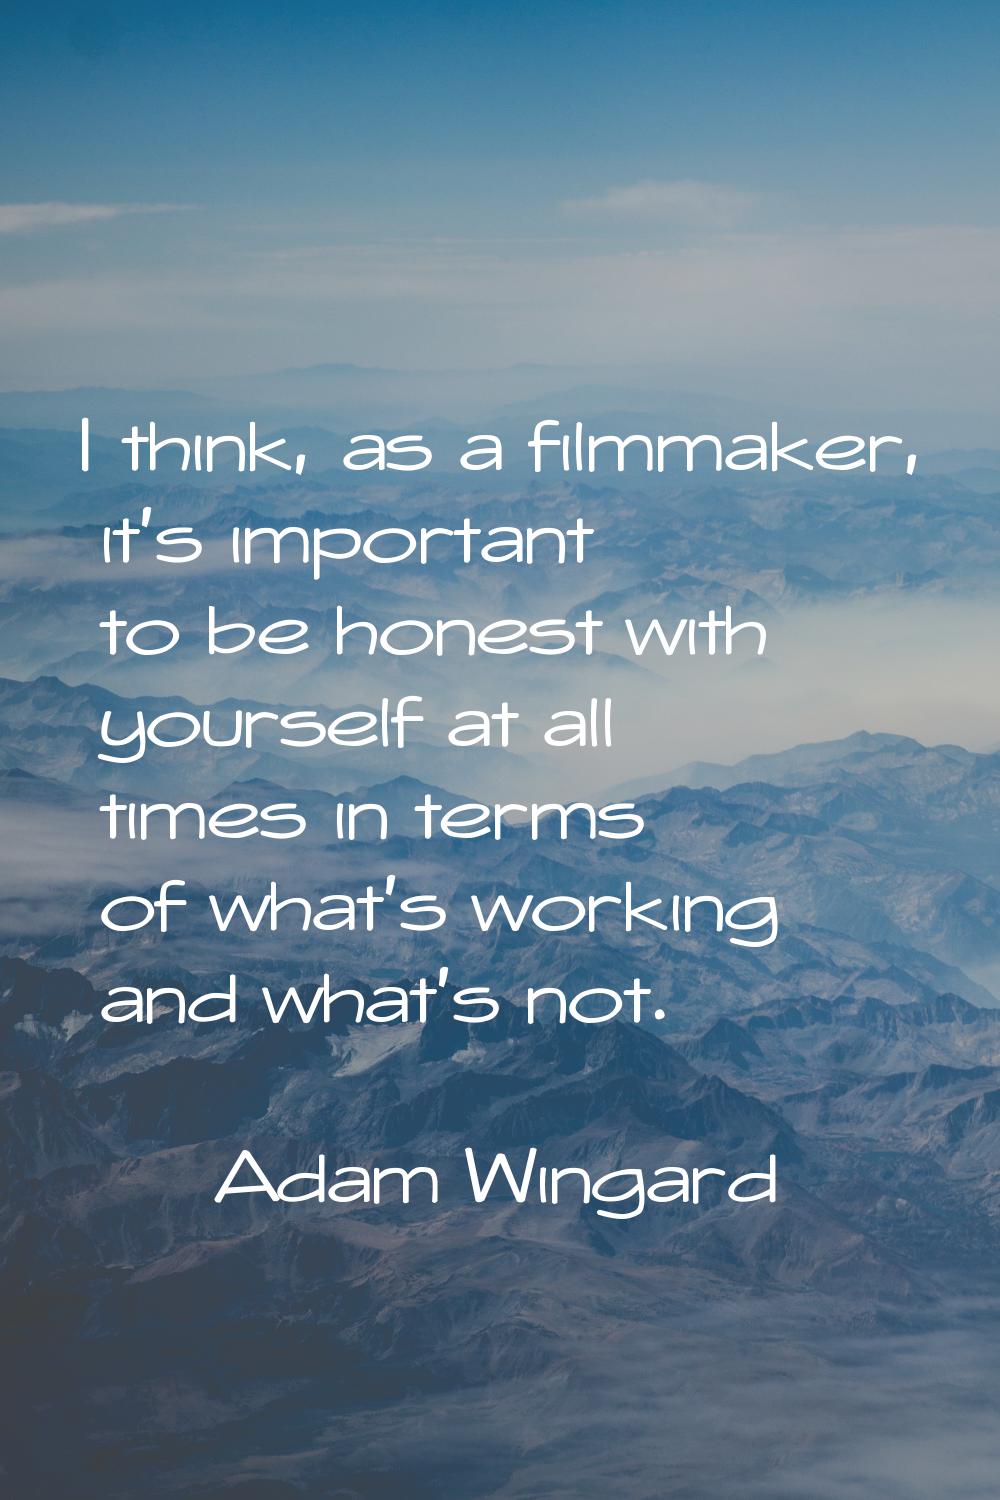 I think, as a filmmaker, it's important to be honest with yourself at all times in terms of what's 